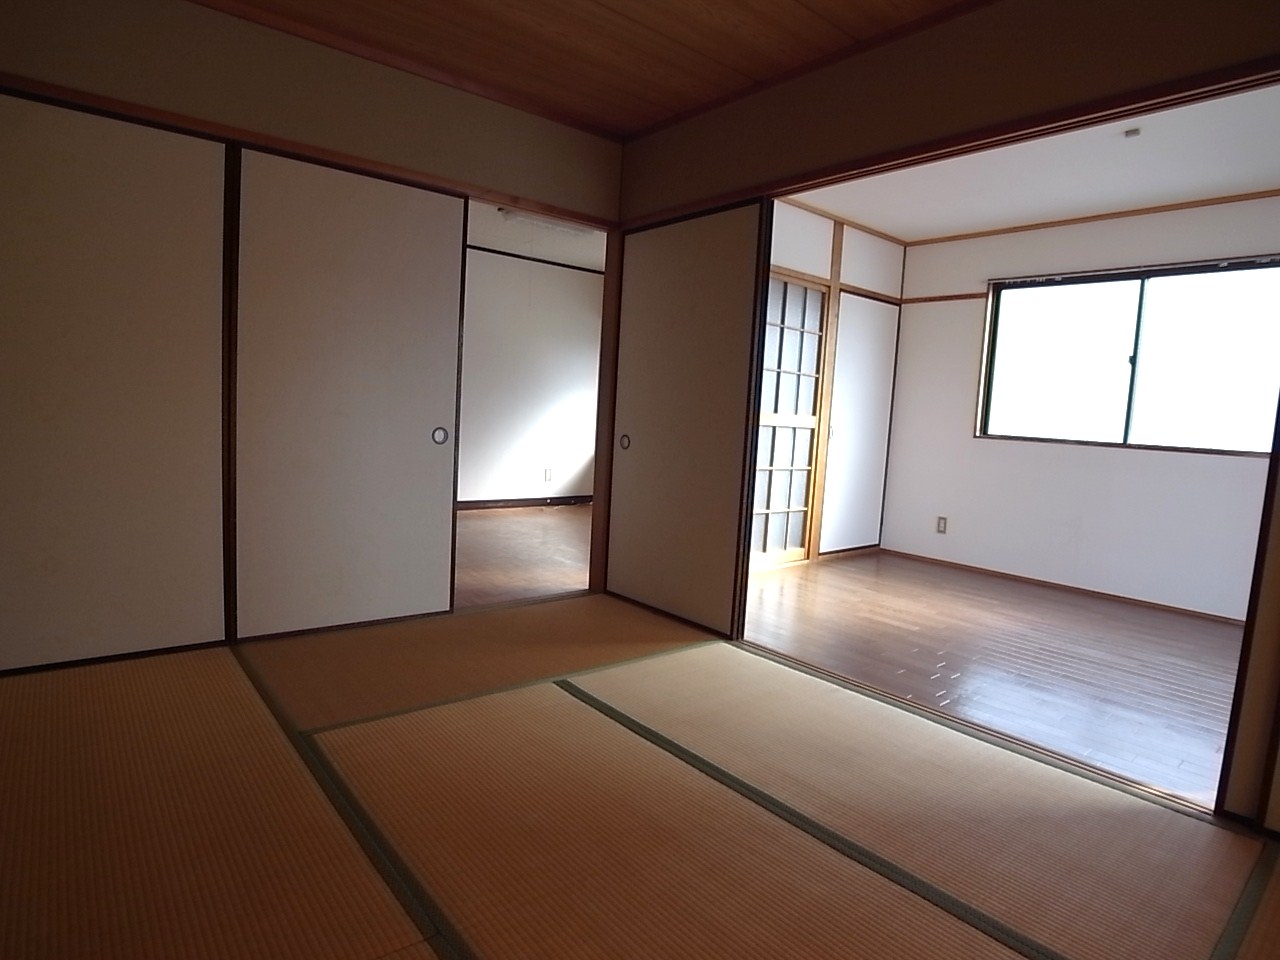 Other room space. It is wide and open to use